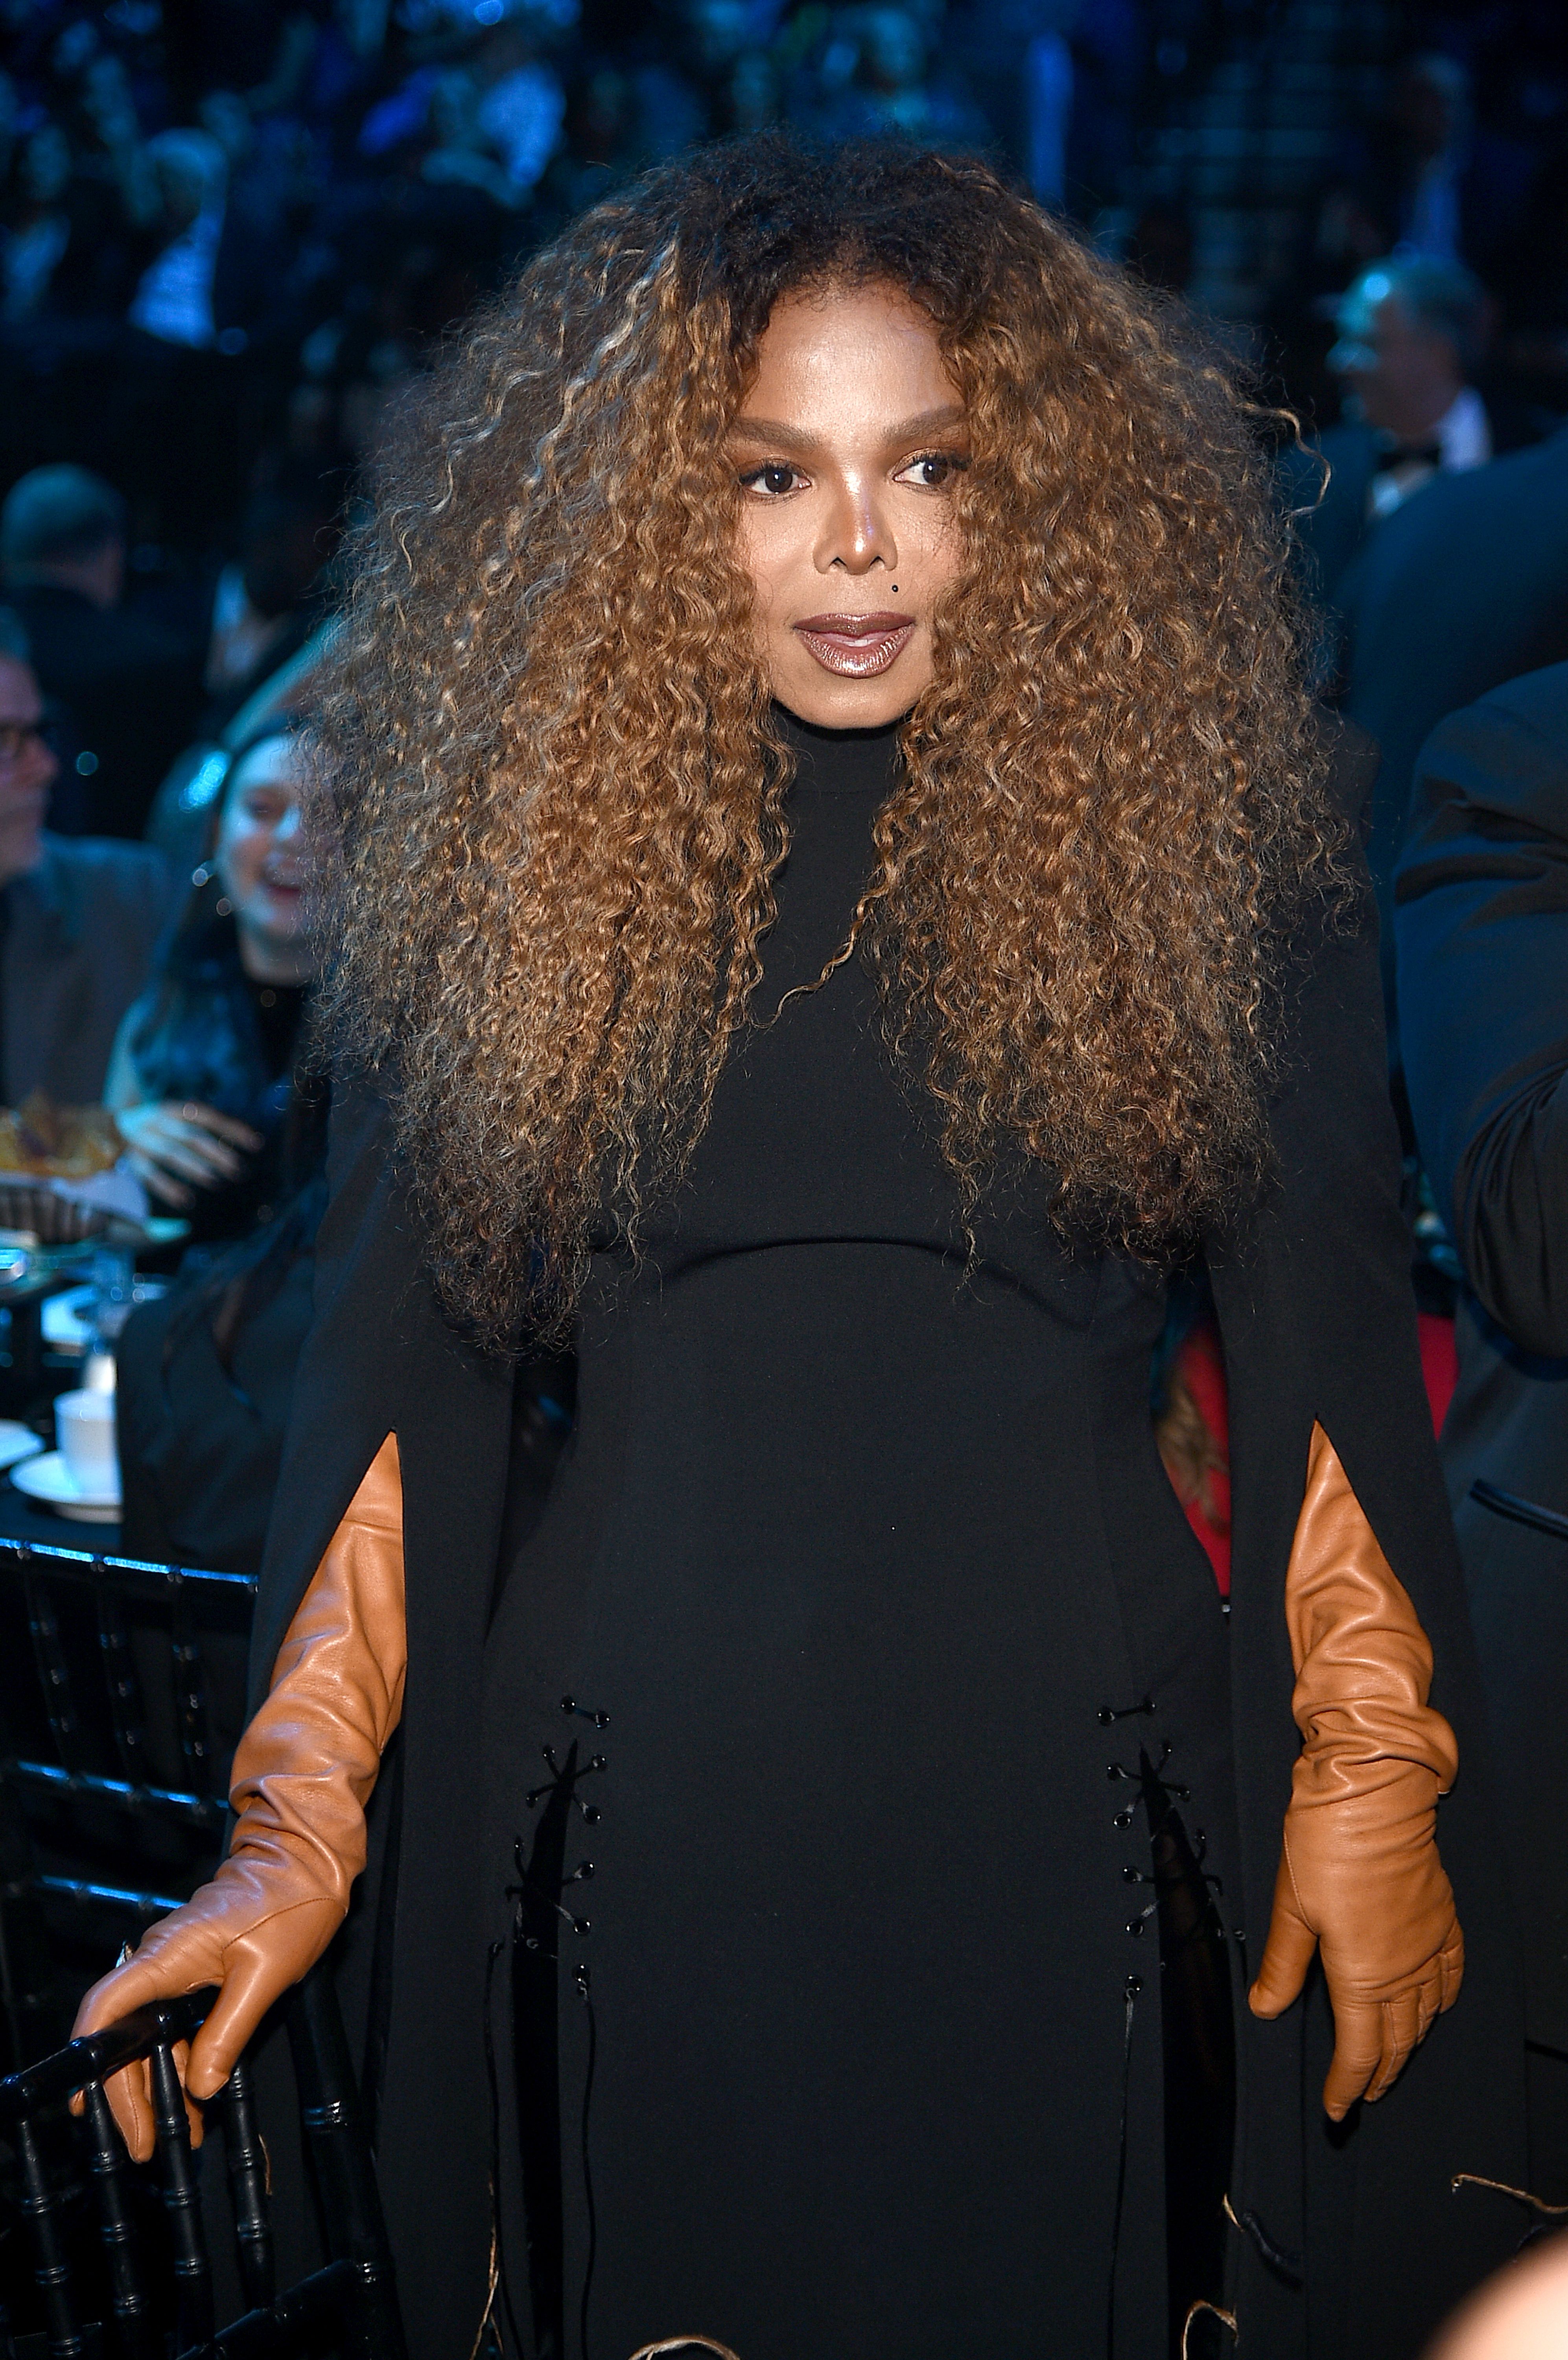  Janet Jackson during the 2019 Rock & Roll Hall Of Fame Induction Ceremony at Barclays Center on March 29, 2019, in New York City. | Source: Getty Images